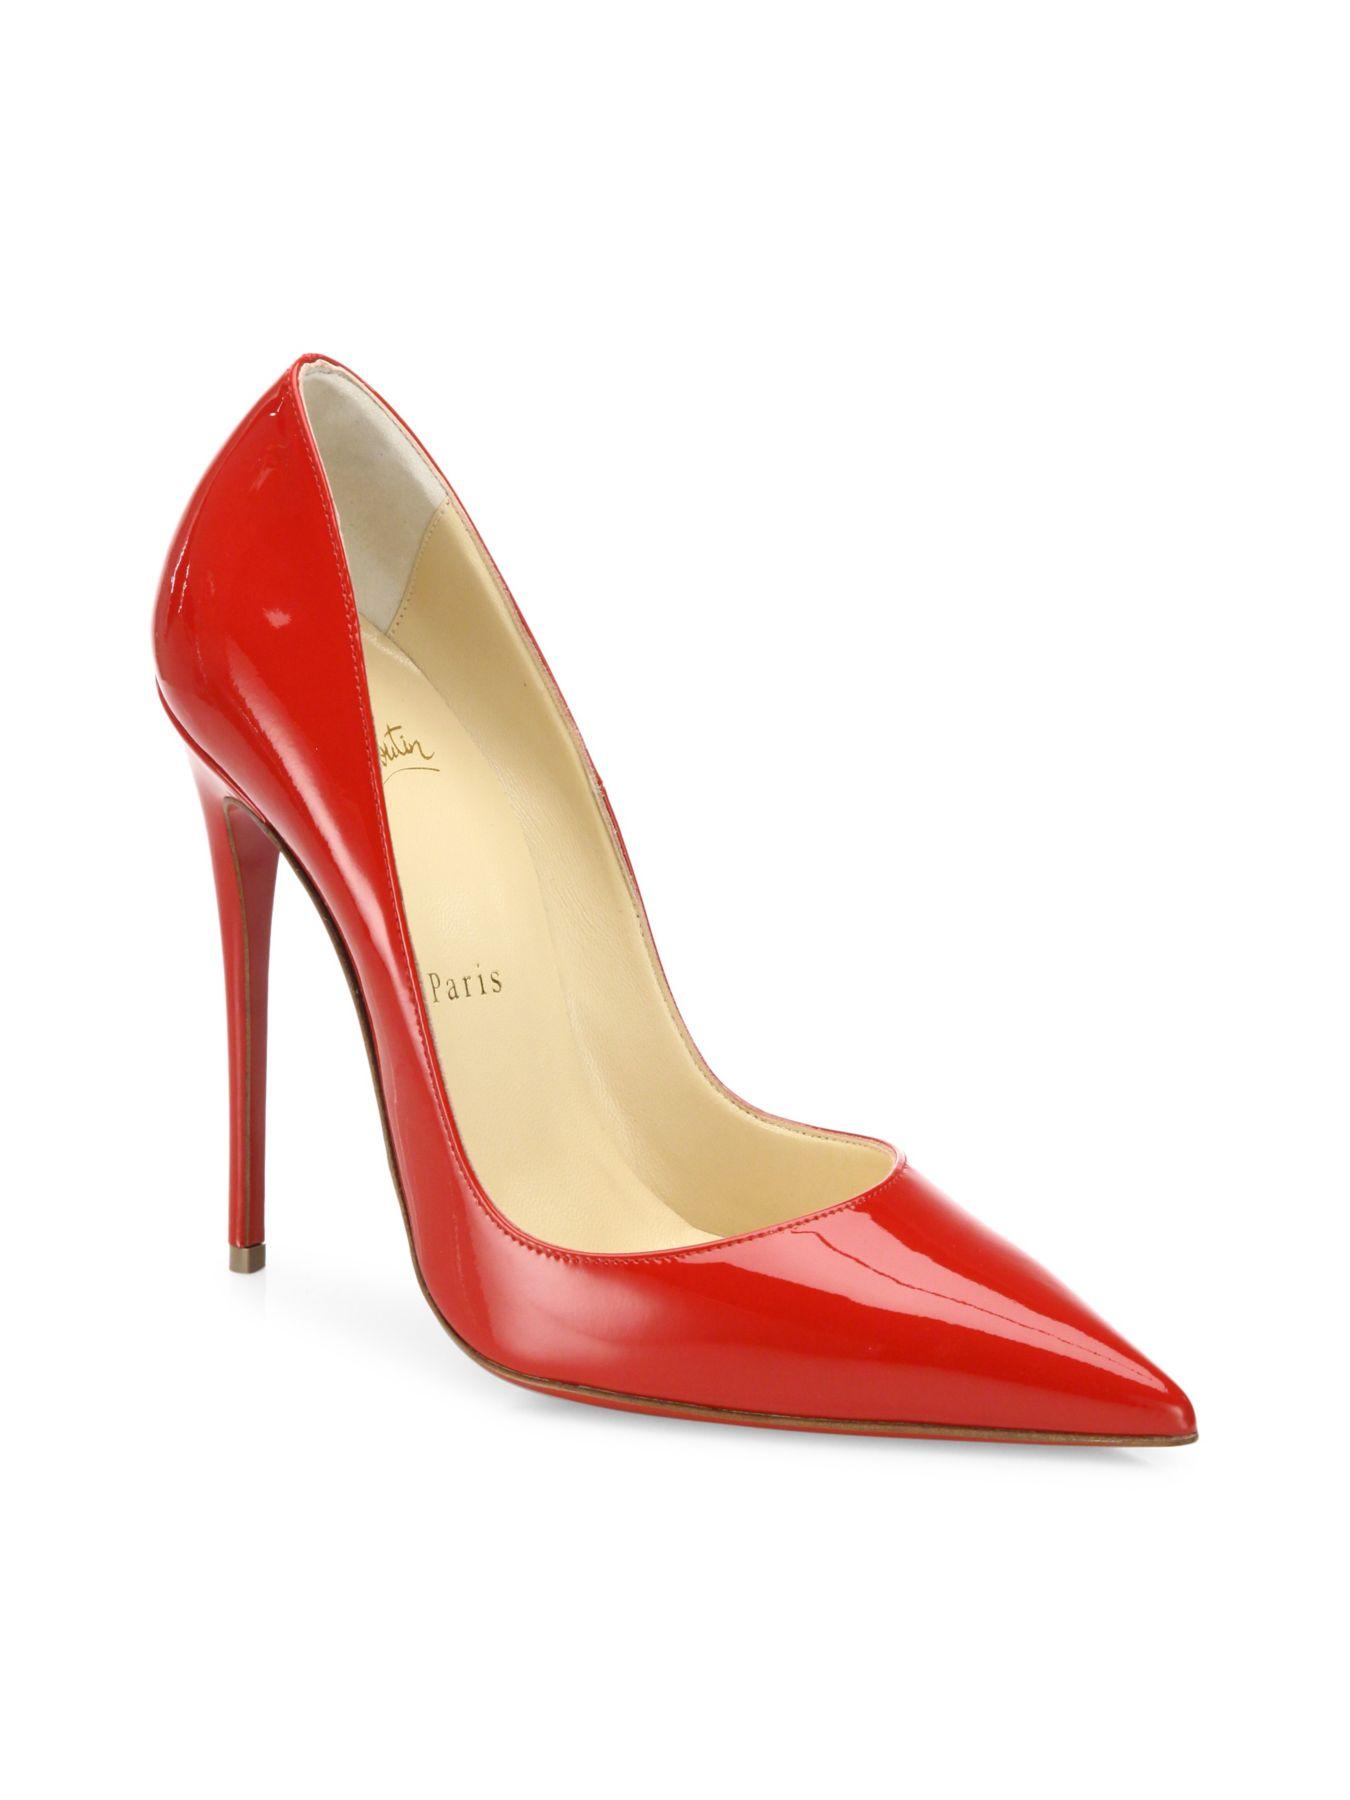 Christian Louboutin So Kate 120 Patent Leather Pumps In Red Lyst